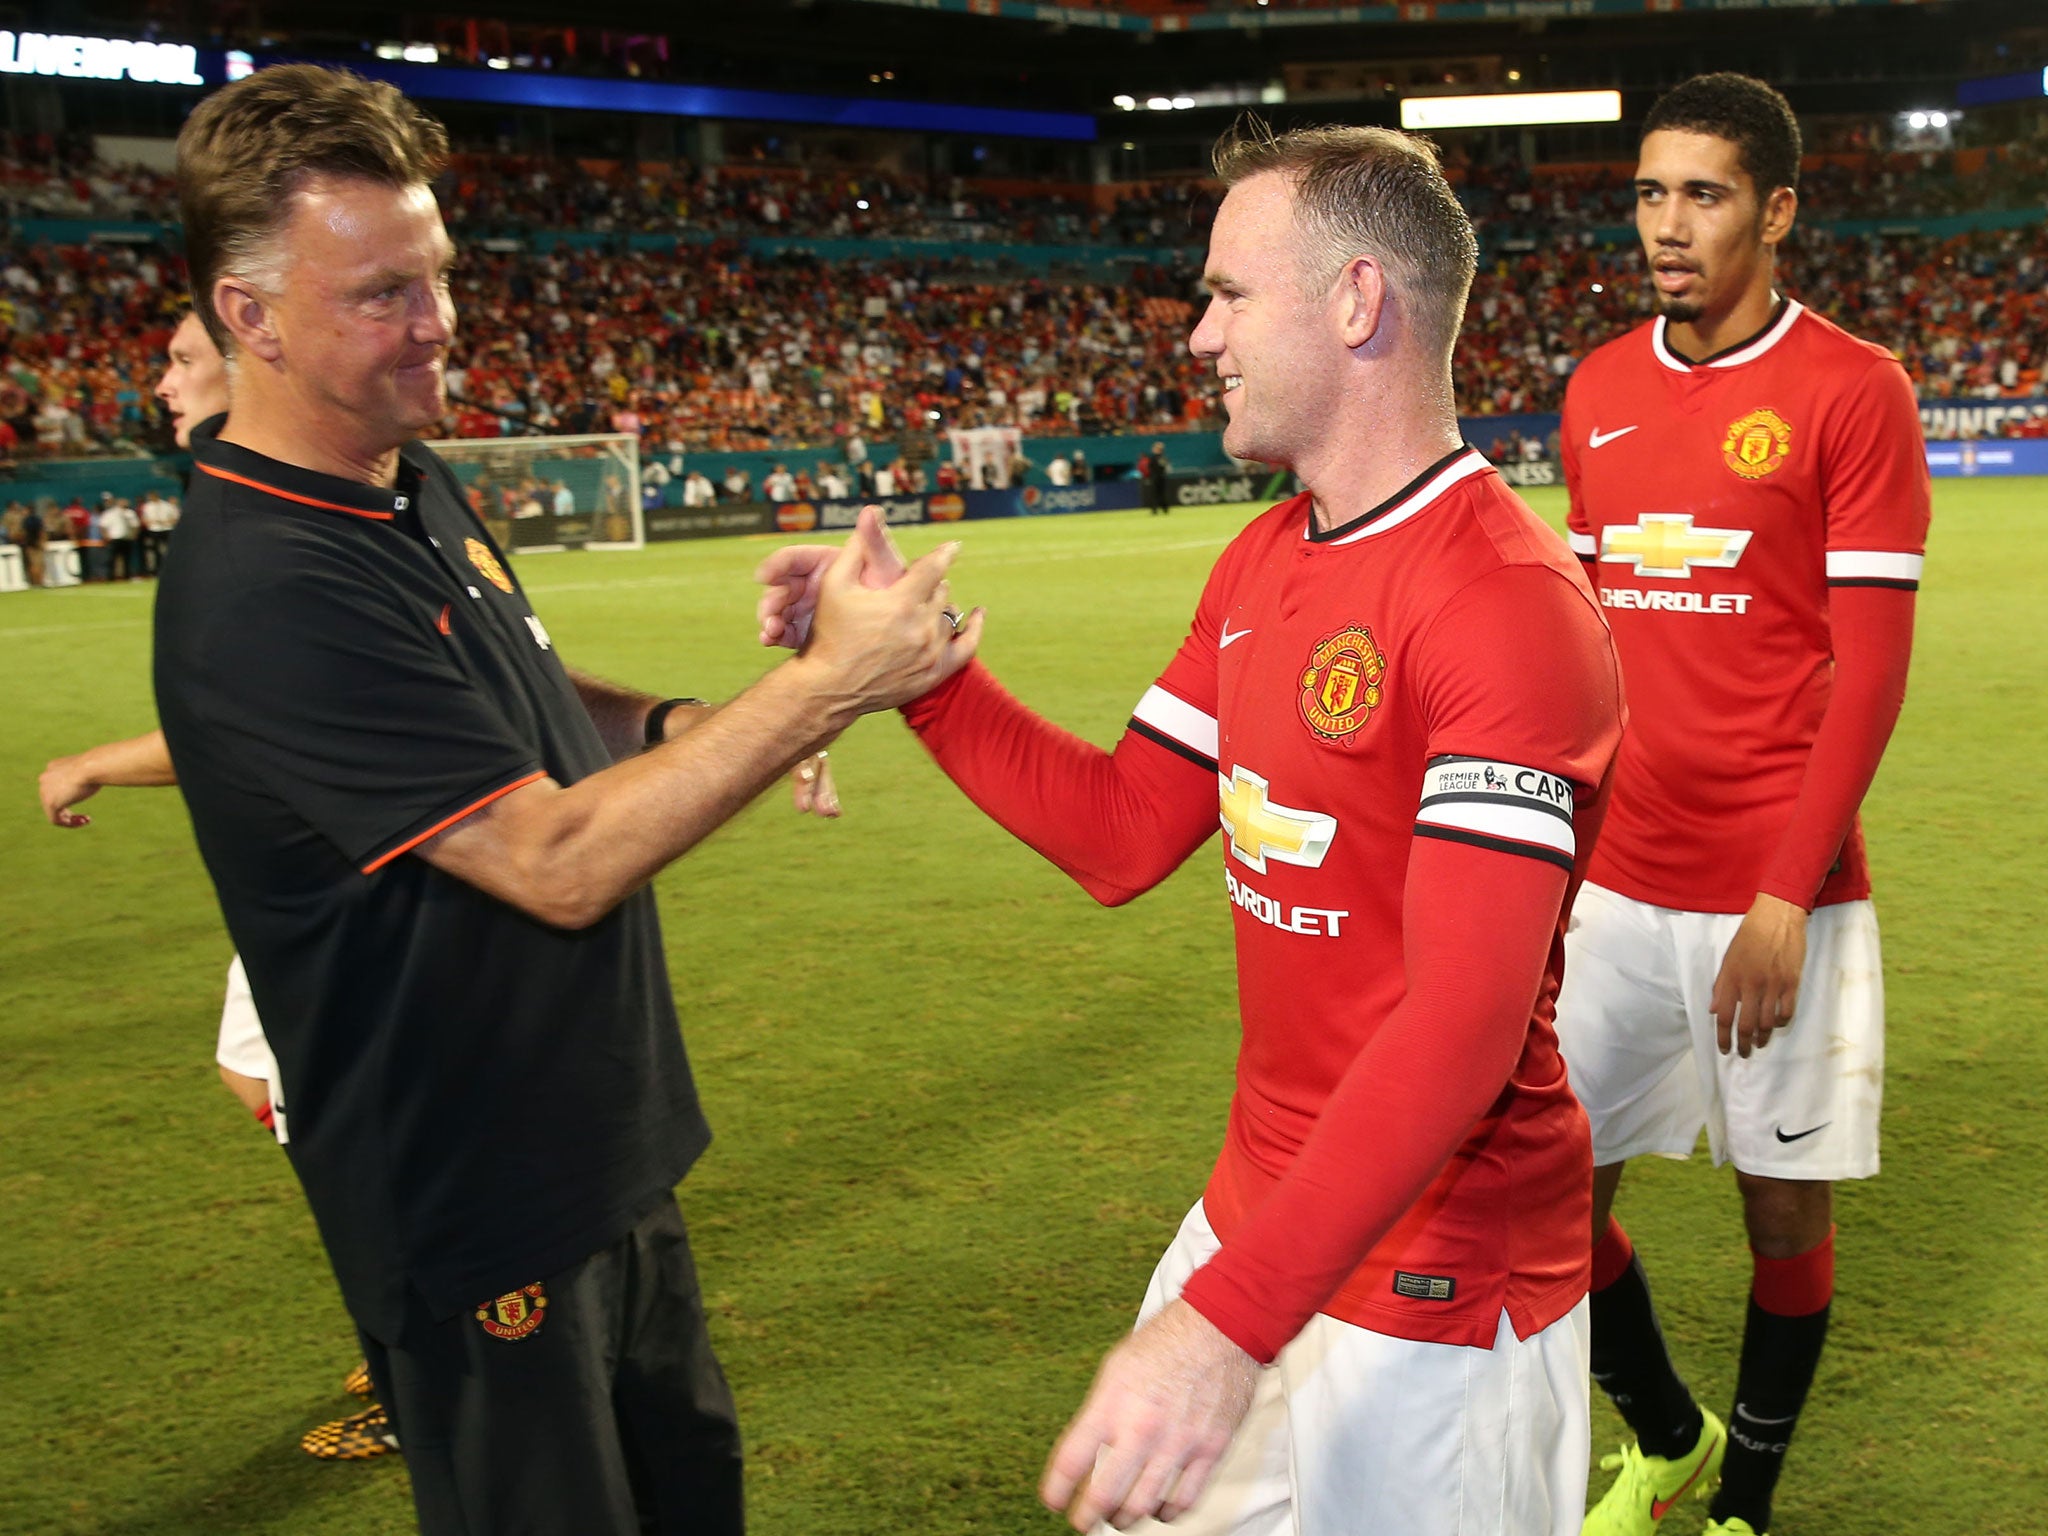 Louis van Gaal shakes Wayne Rooney's hand at full time after the Liverpool win